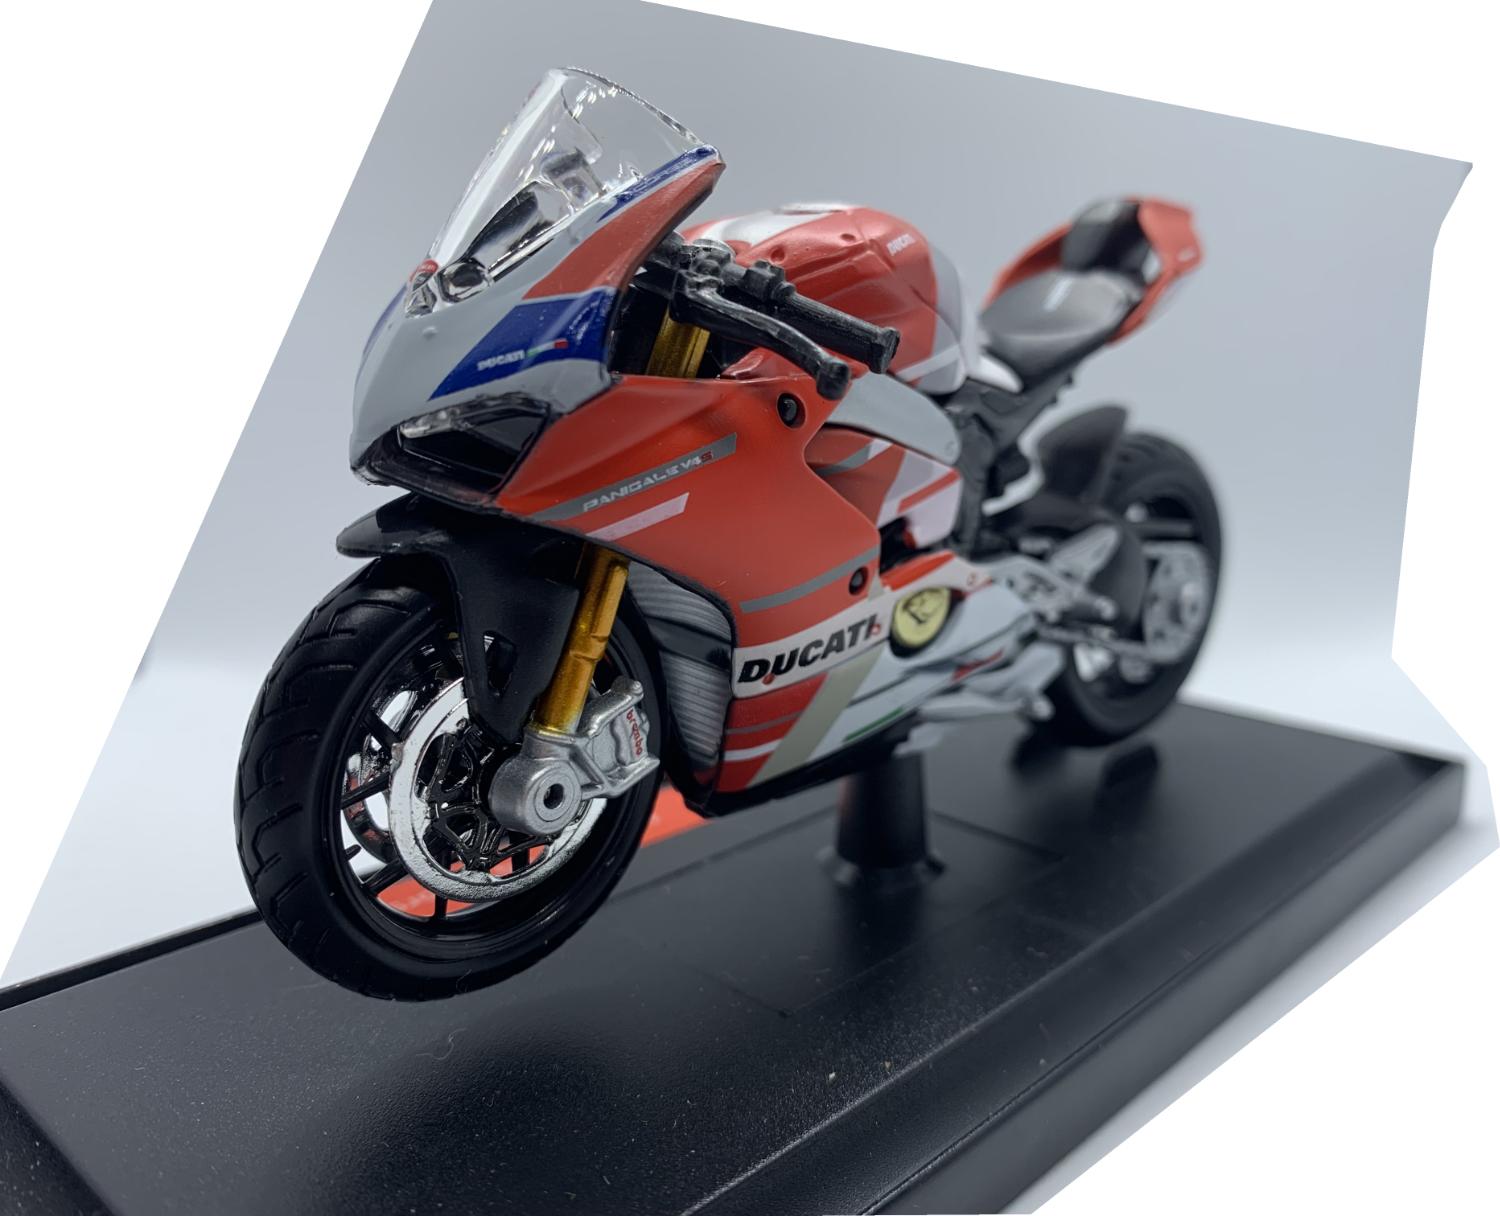 Ducati Panigale V4 S Corse in red, white and grey 1:18 scale model from Maisto